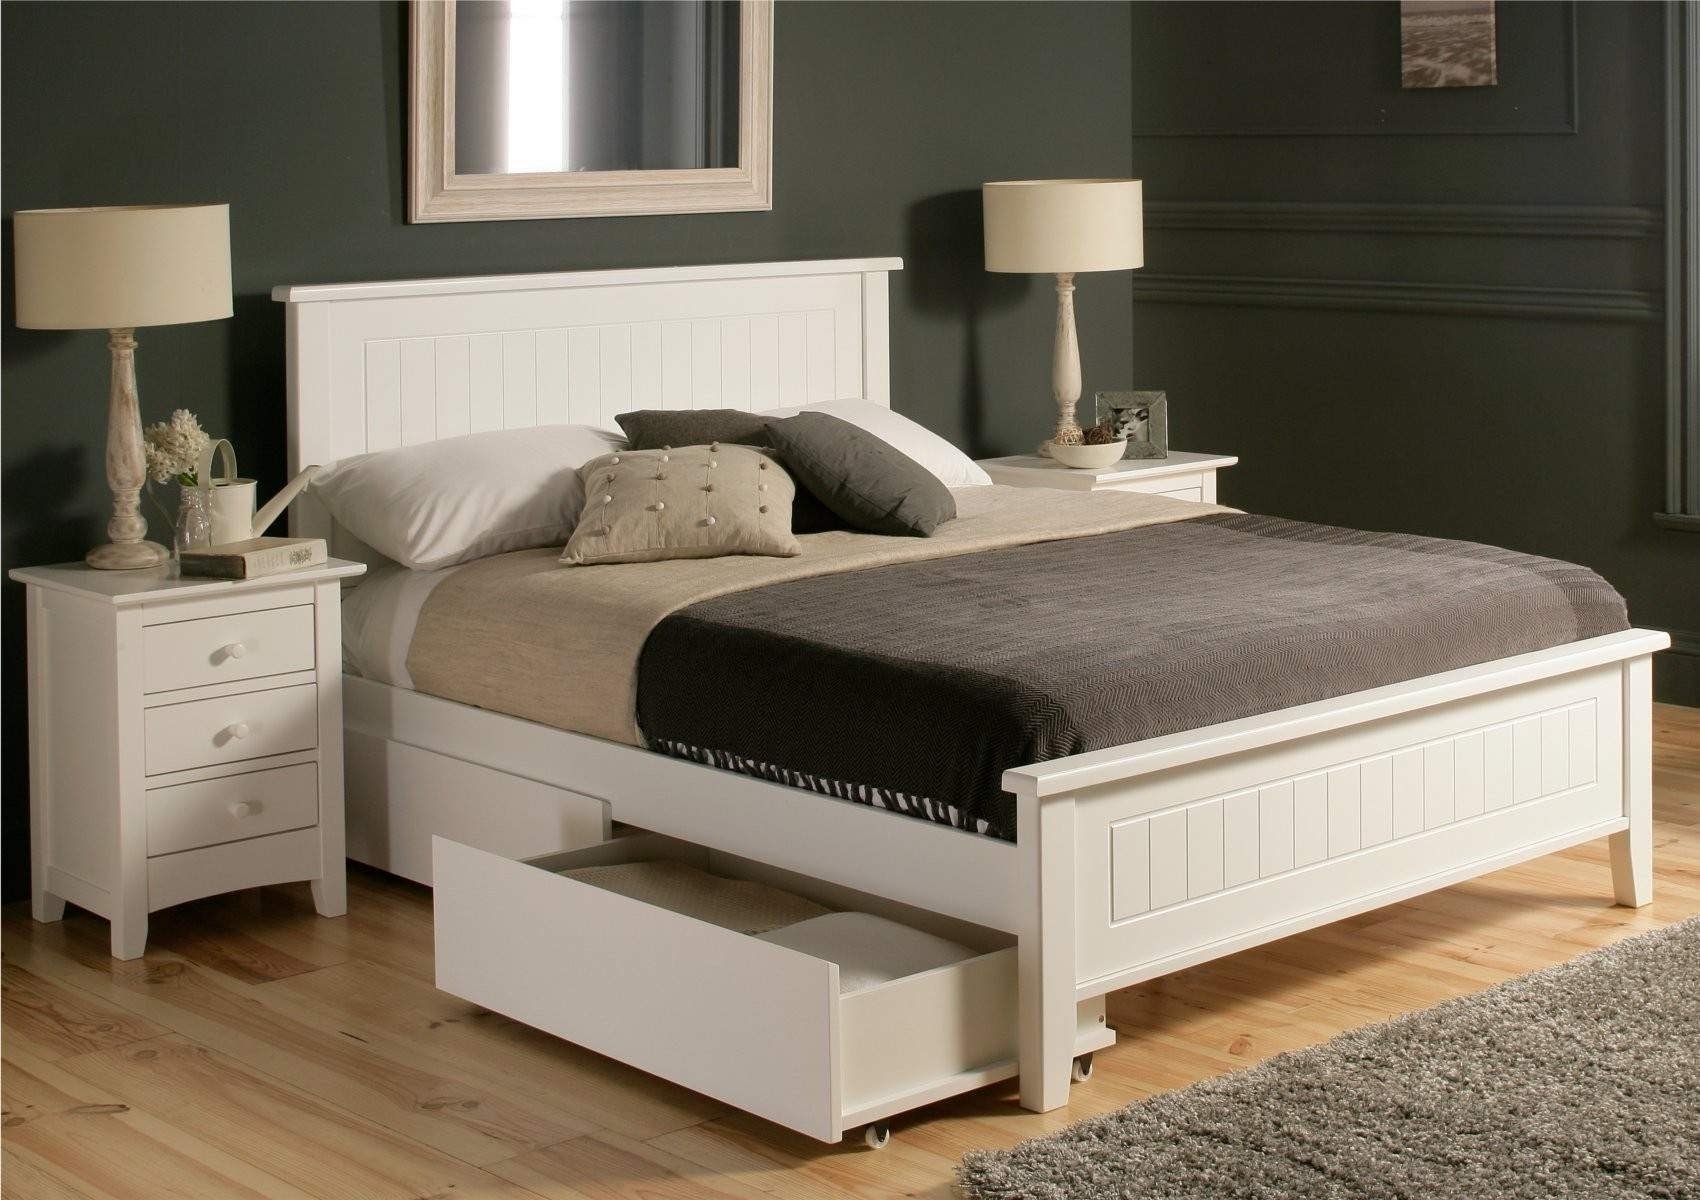 Bed With Drawers Underneath Visualhunt, King Bed Frame With Drawers Under